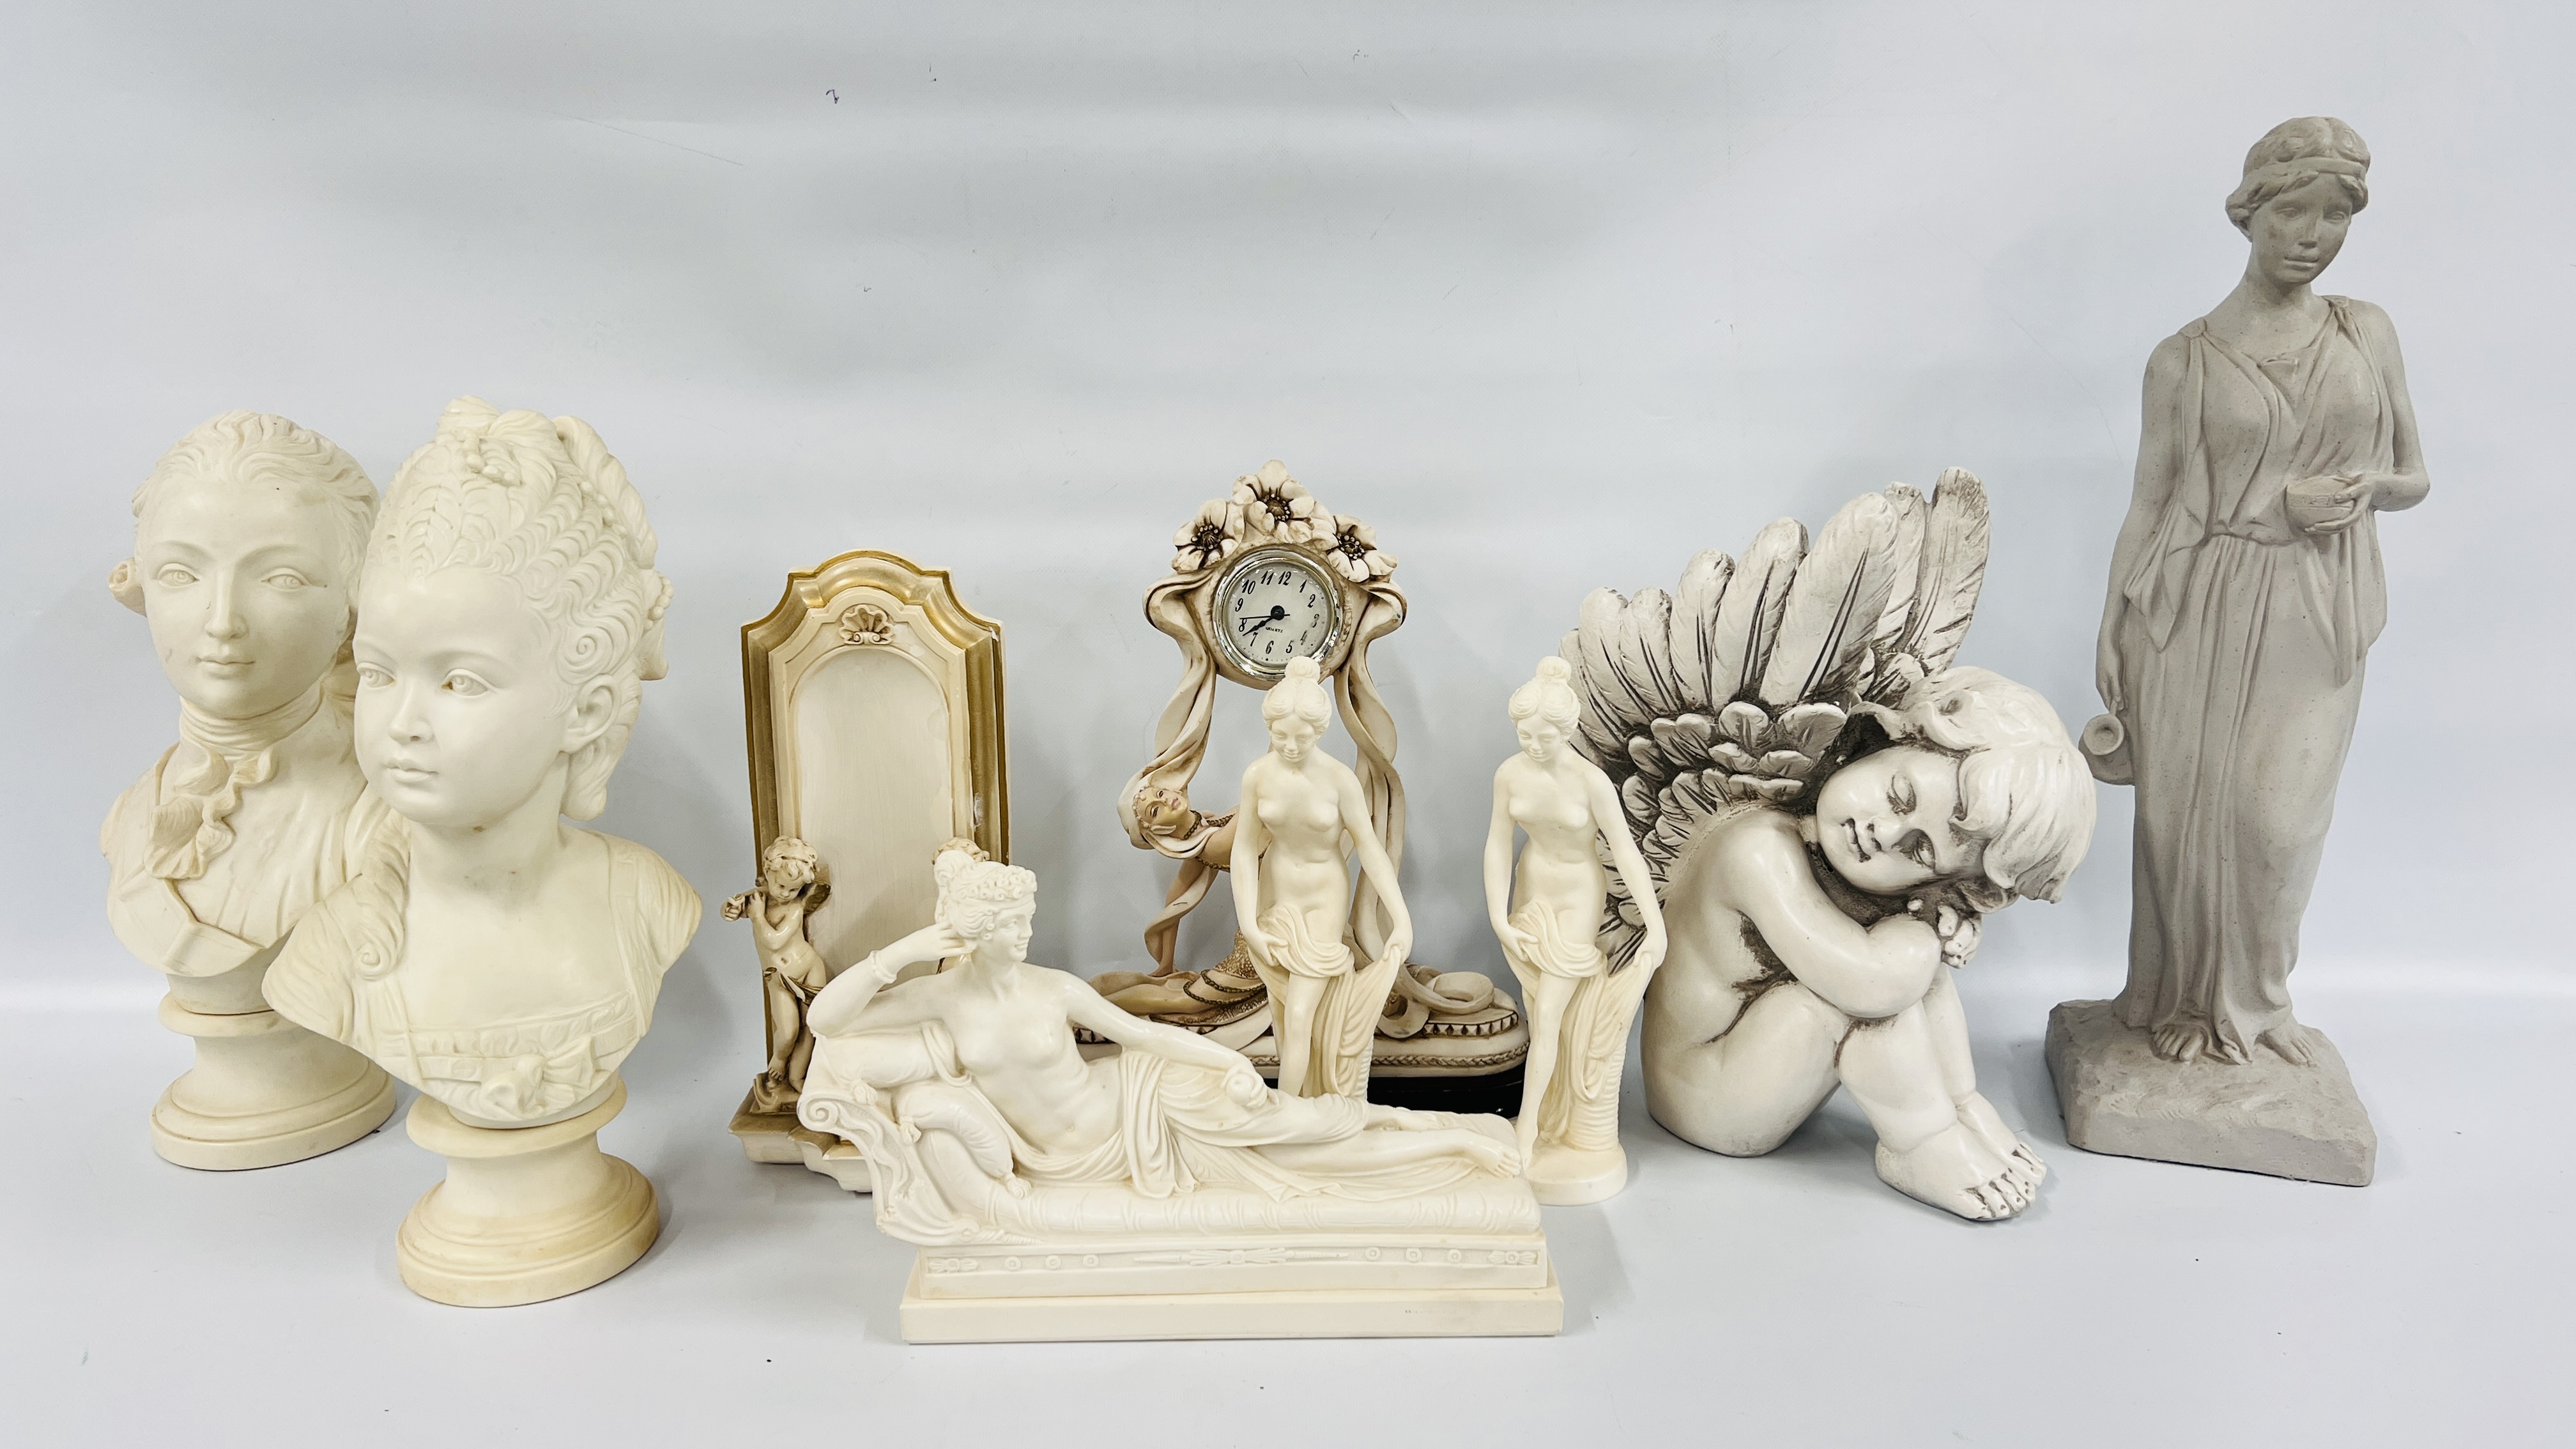 COLLECTION OF CLASSICAL STUDIES TO INCLUDE A RECLINING NUDE AND AN ANGEL ALONG WITH A PAIR OF